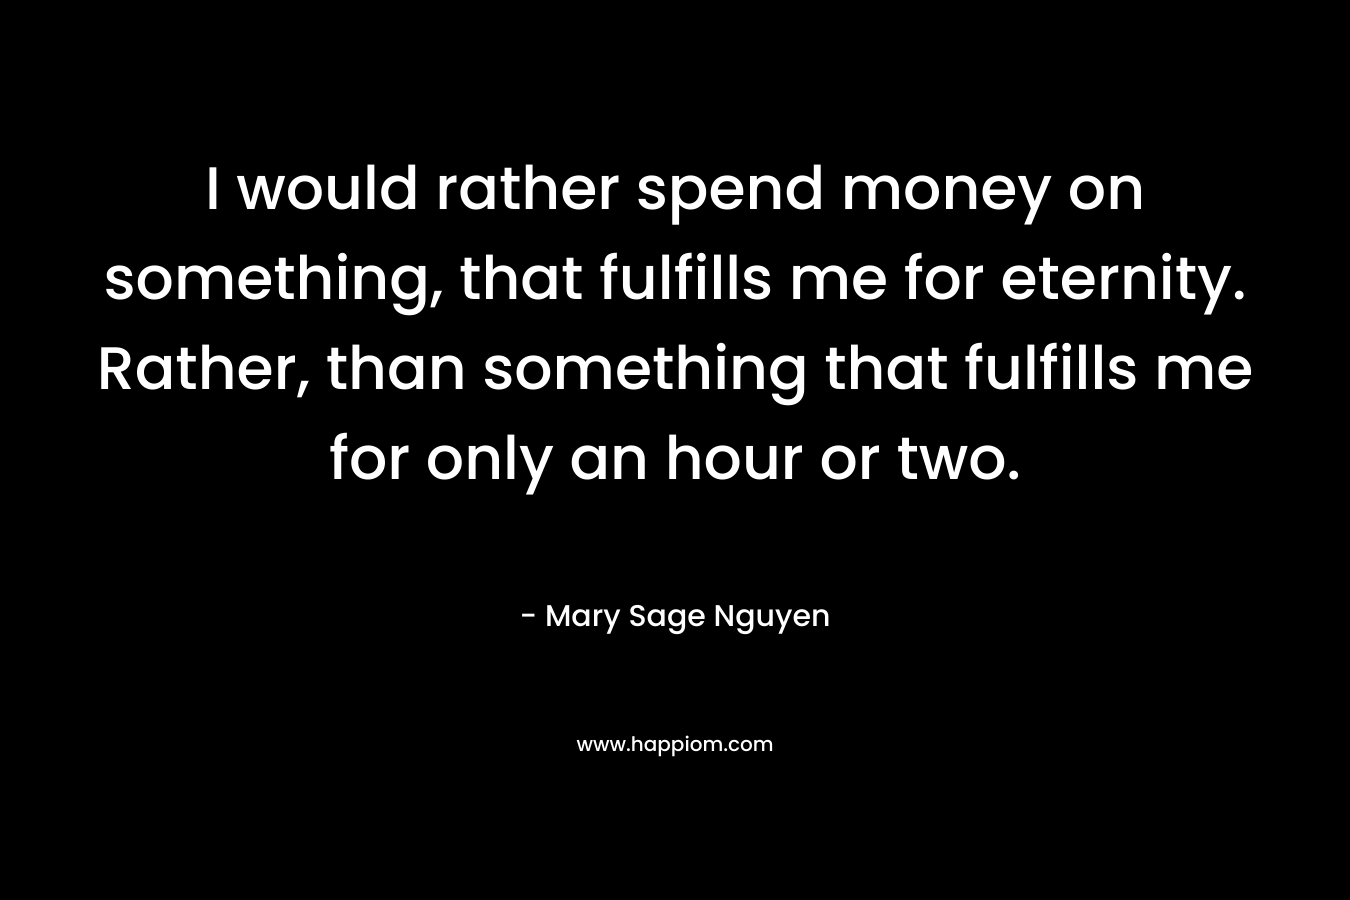 I would rather spend money on something, that fulfills me for eternity. Rather, than something that fulfills me for only an hour or two.